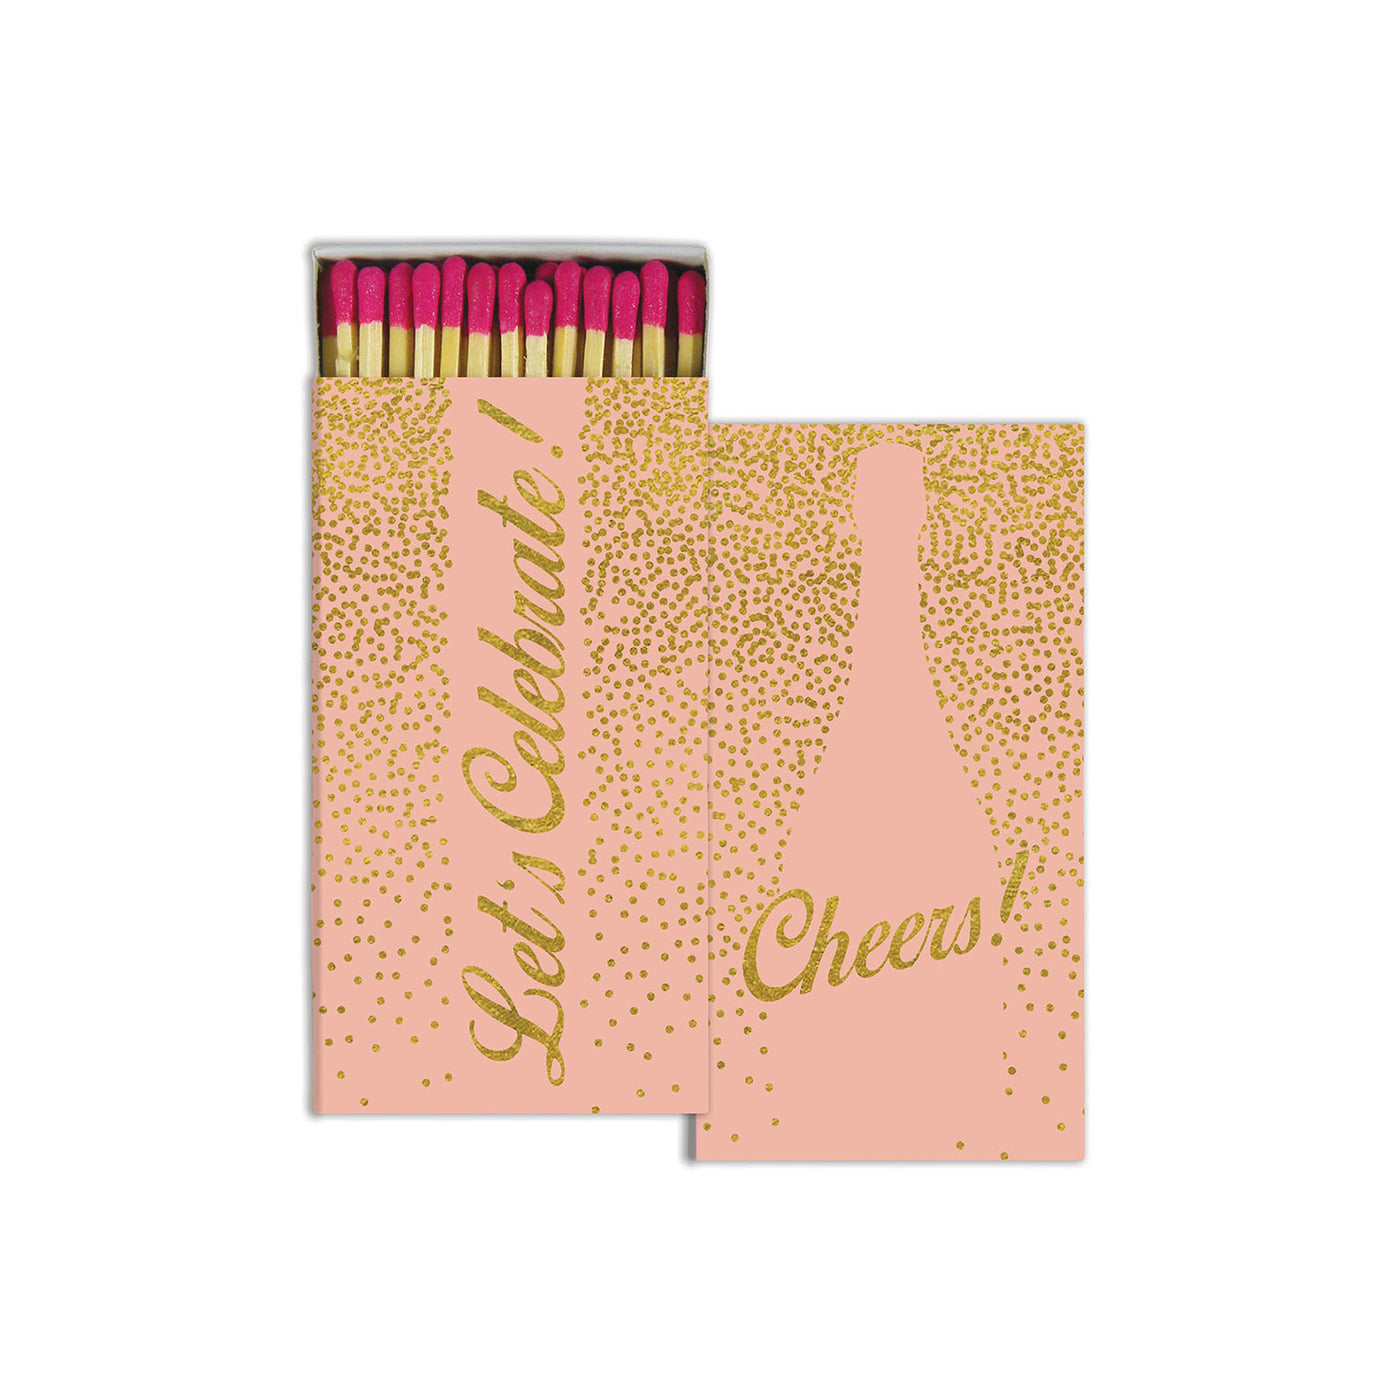 Cheers Matches - Gold Foil